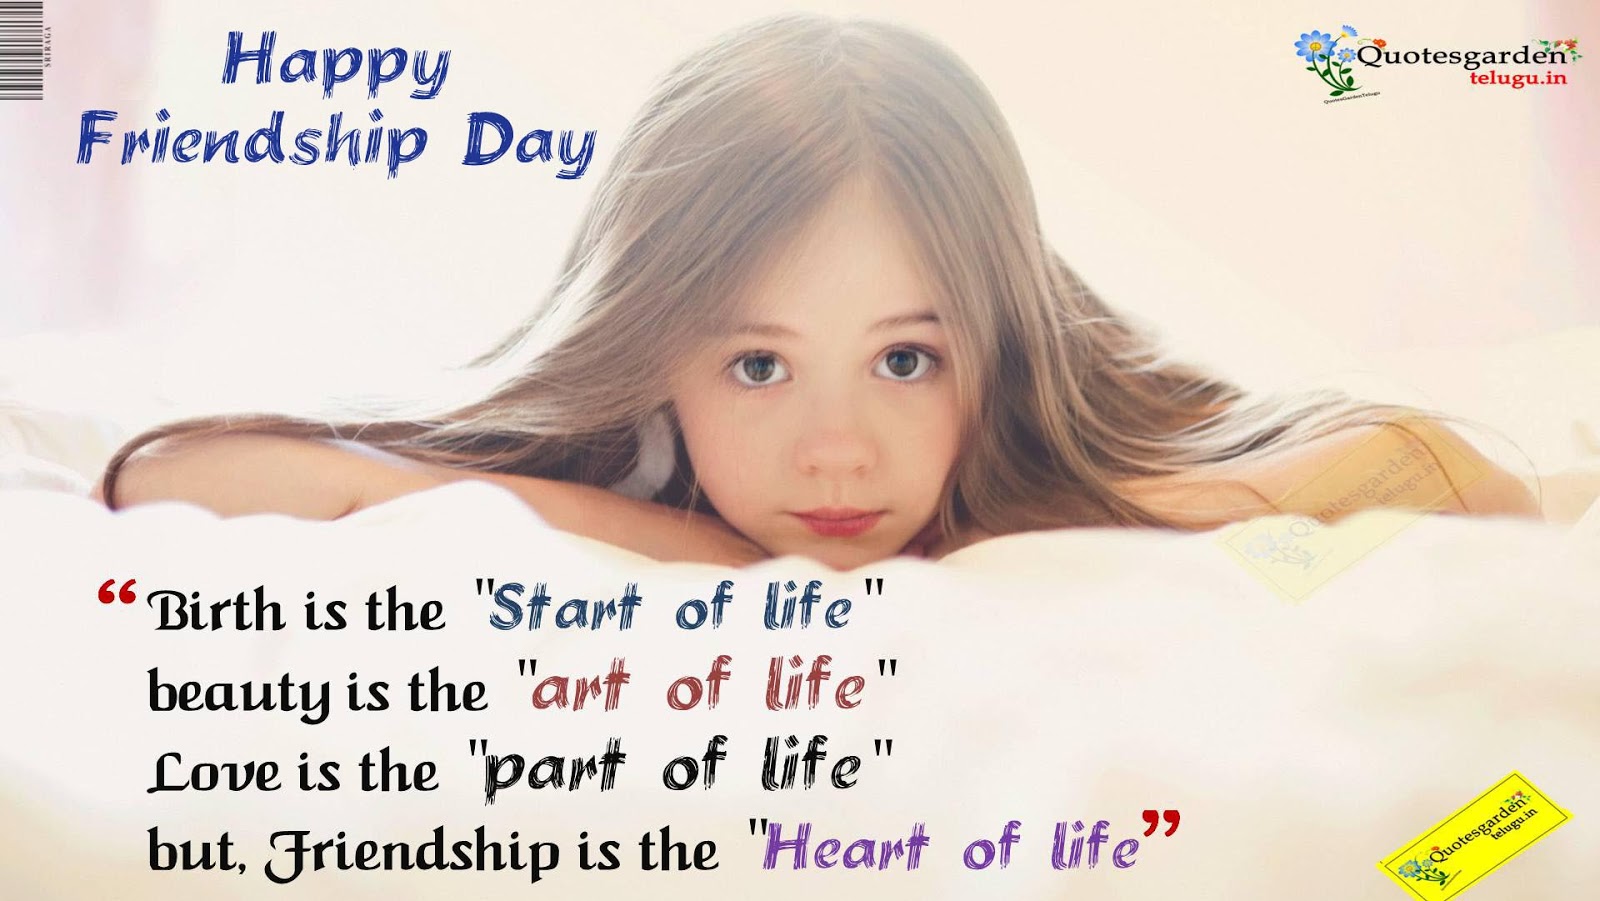 Friendship Day Quotes wallpapers pictures greetings wishes photoes images  744 | QUOTES GARDEN TELUGU | Telugu Quotes | English Quotes | Hindi Quotes |